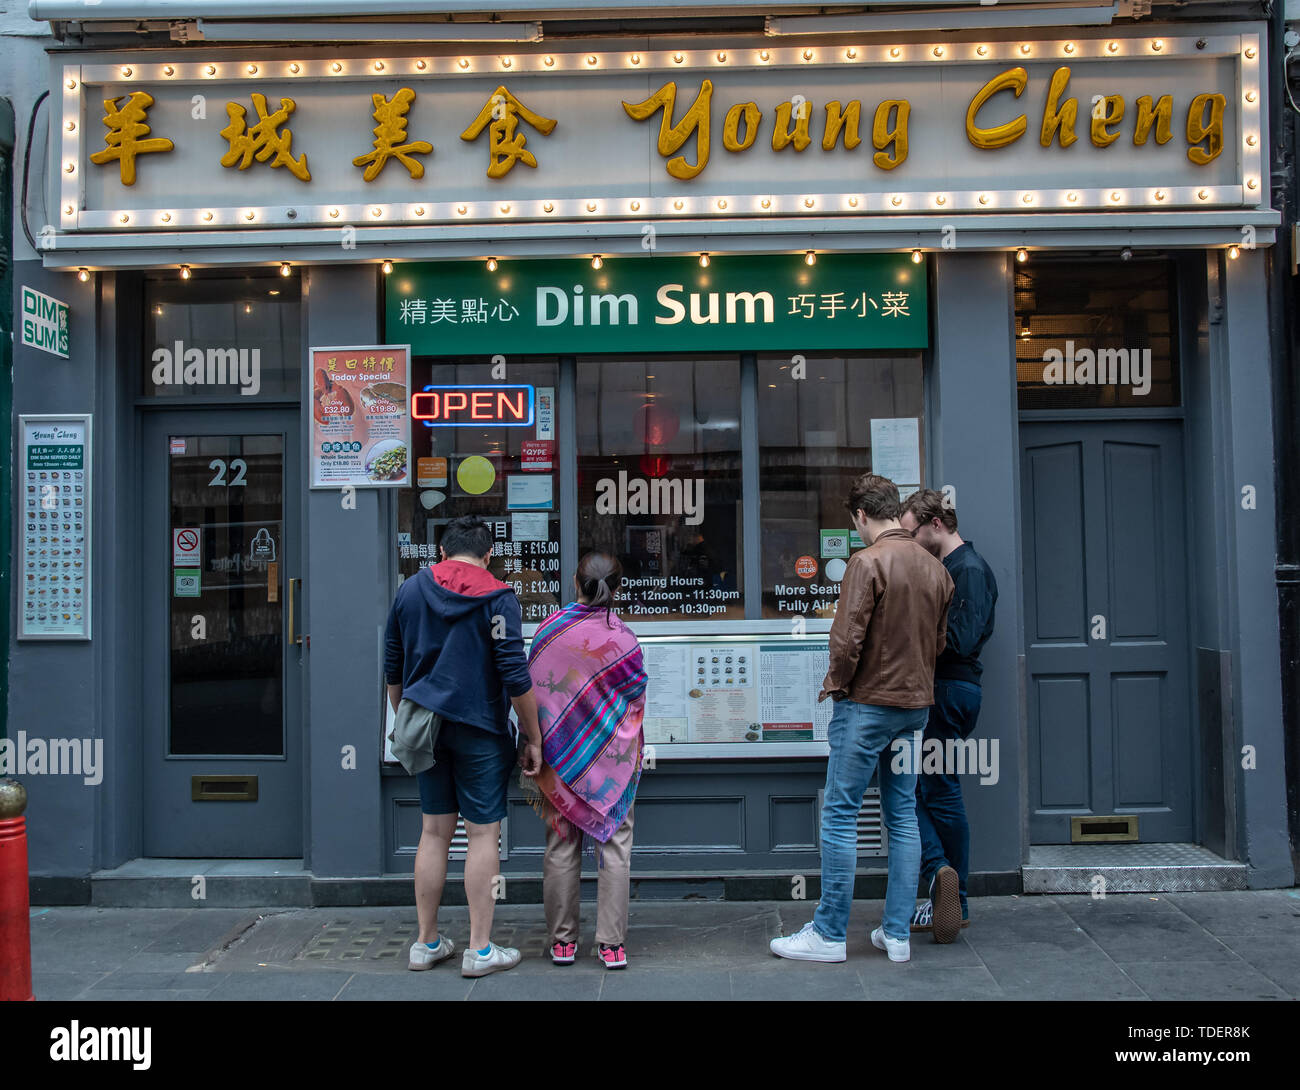 London, UK. London, UK. Young Cheng in London Chinatown Sweet Tooth Cafe and Restaurant at Newport Court and Garret Street on 15 June 2019, UK. Credit: Picture Capital/Alamy Live News Credit: Picture Capital/Alamy Live News Stock Photo